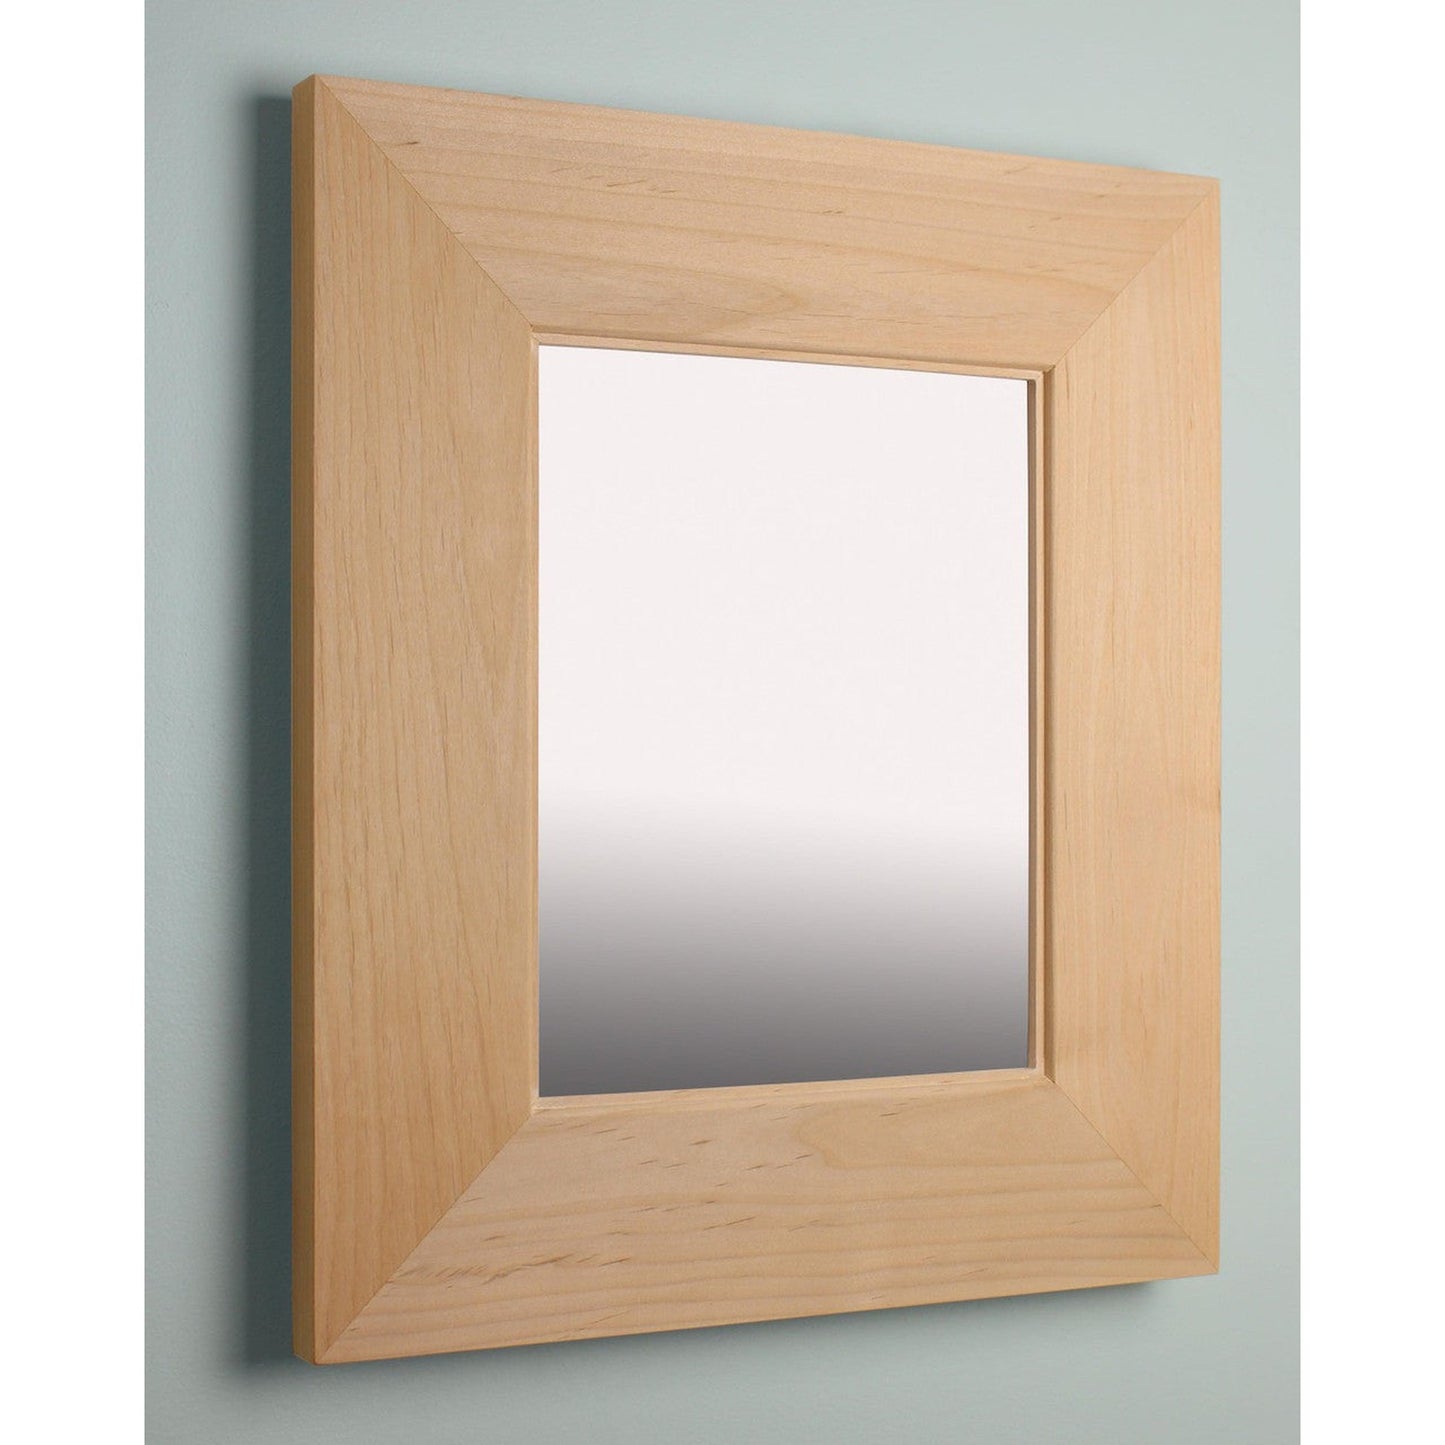 Fox Hollow Furnishings 11" x 14" Unfinished Portrait Flat Edge Special 3" Depth Mirrored Medicine Cabinet